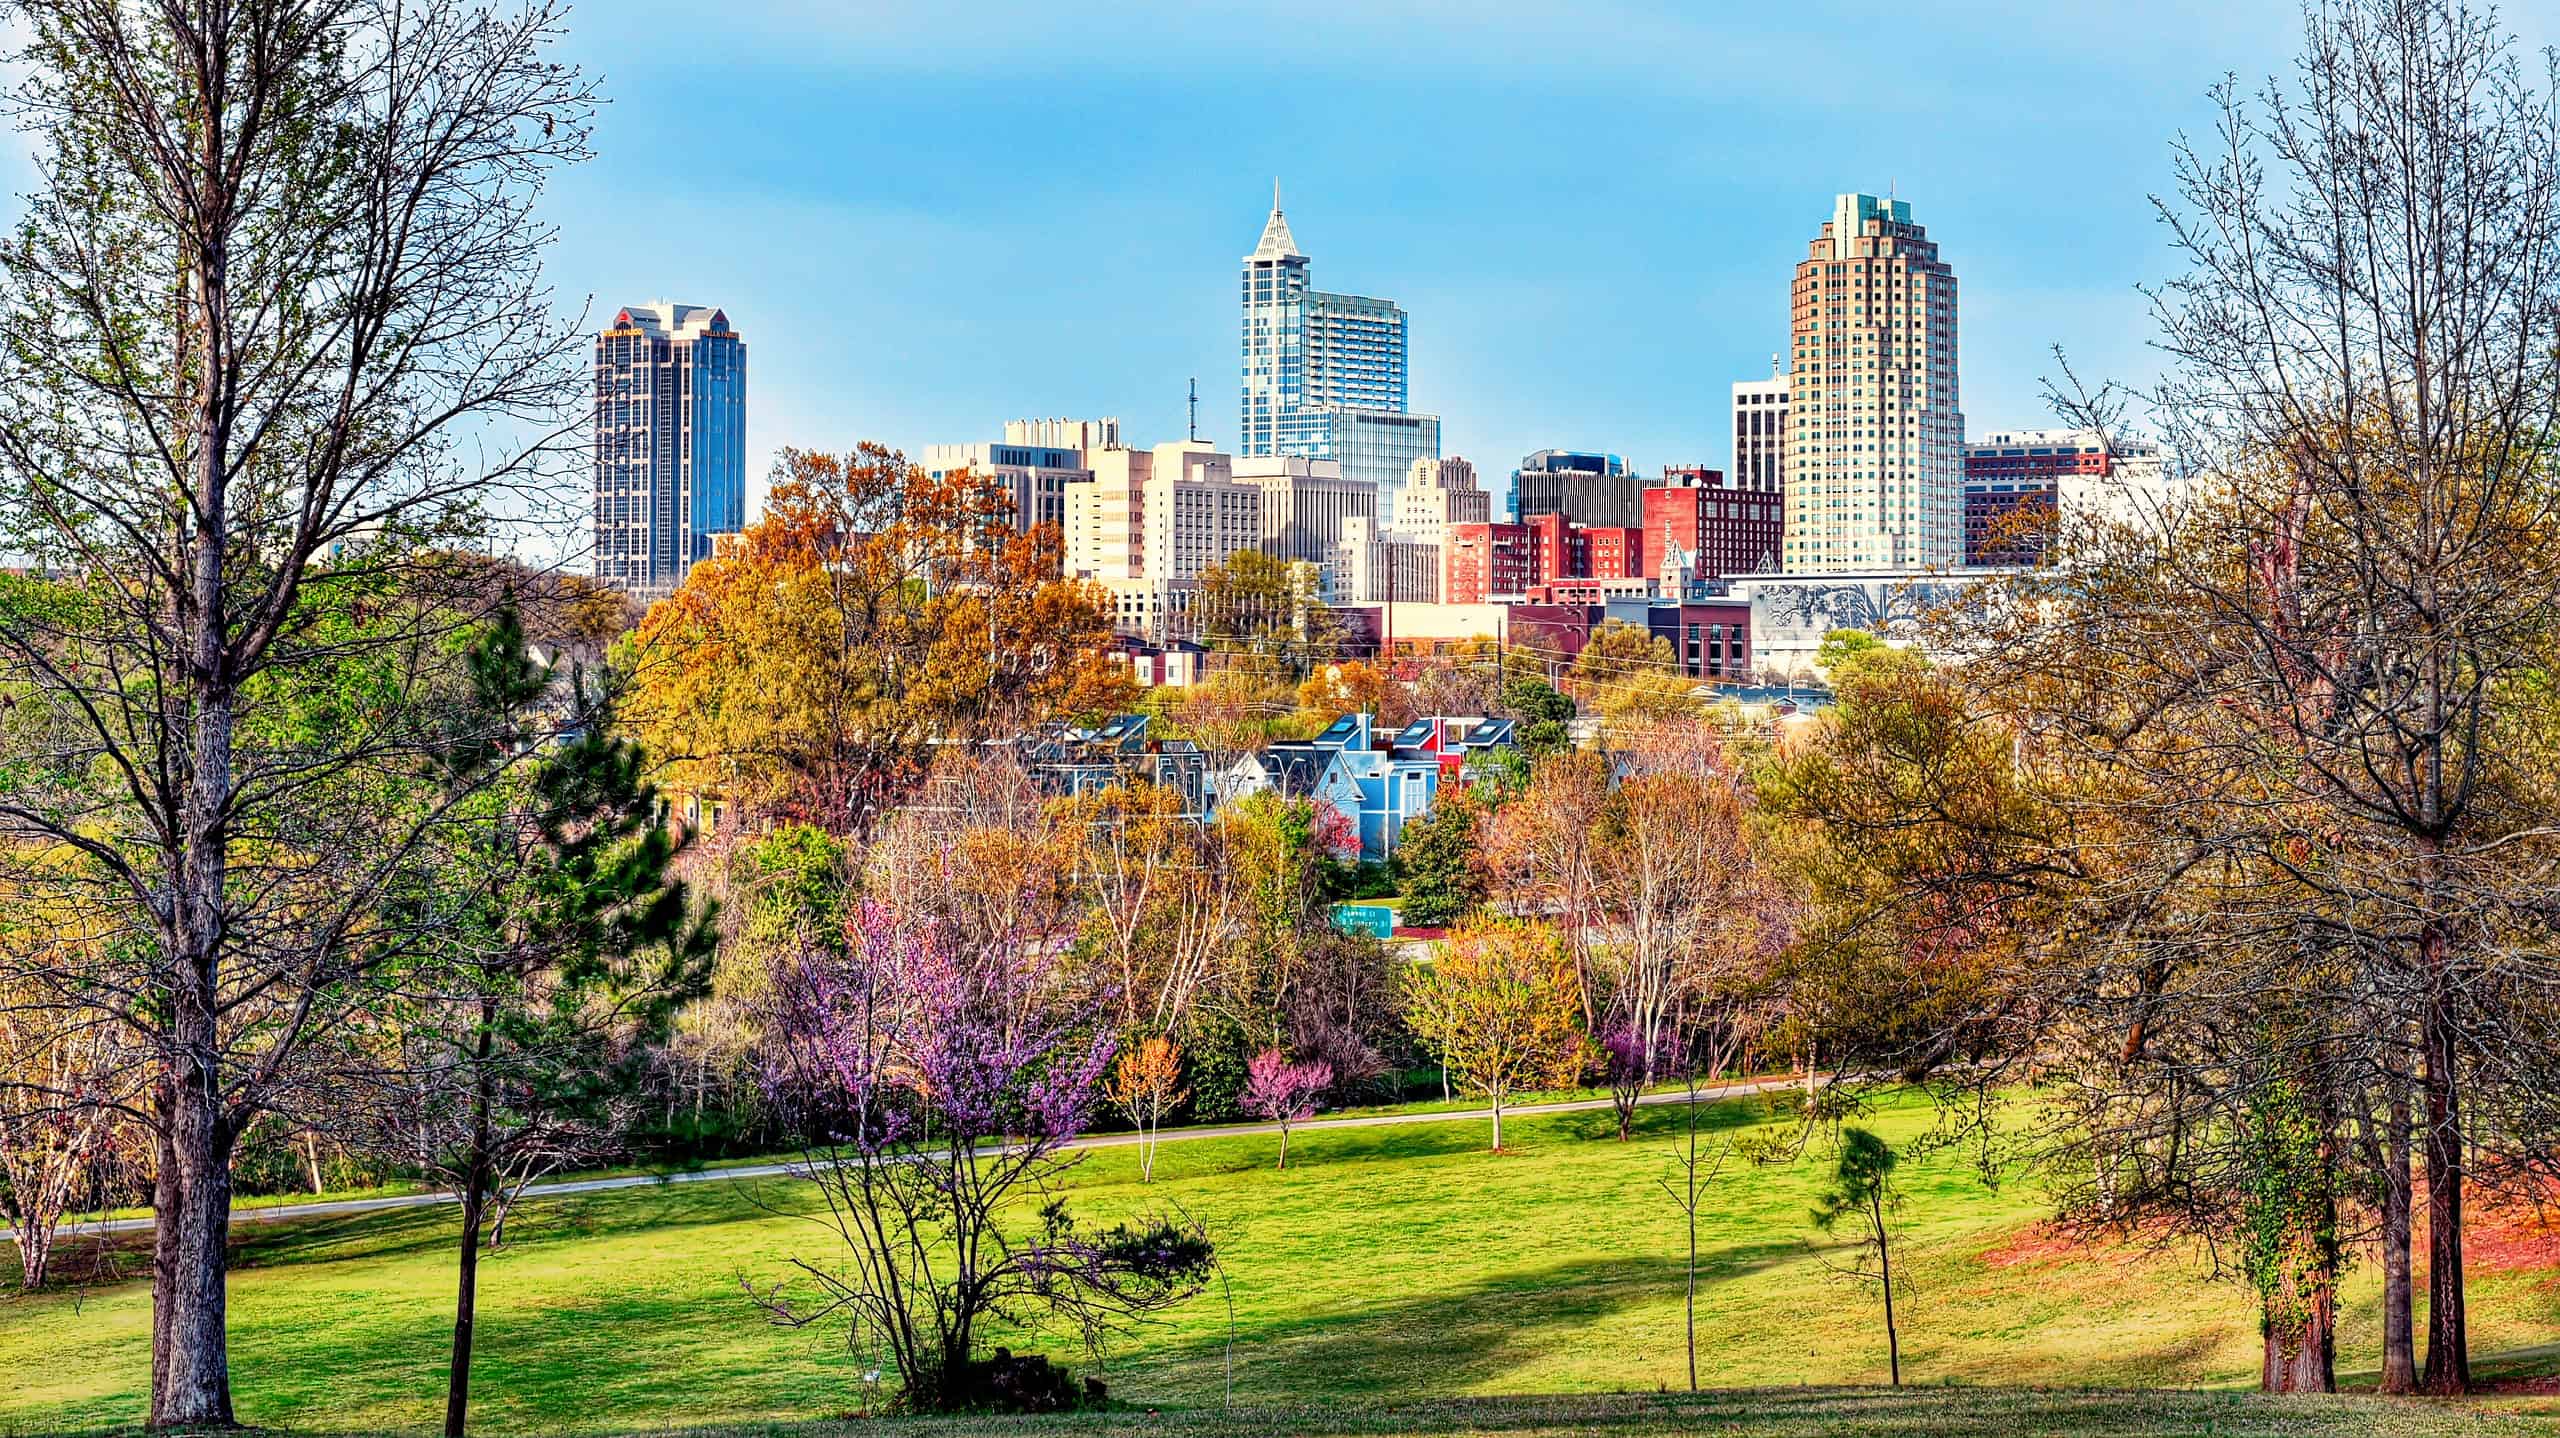 Raleigh, NC is lovely in the spring.